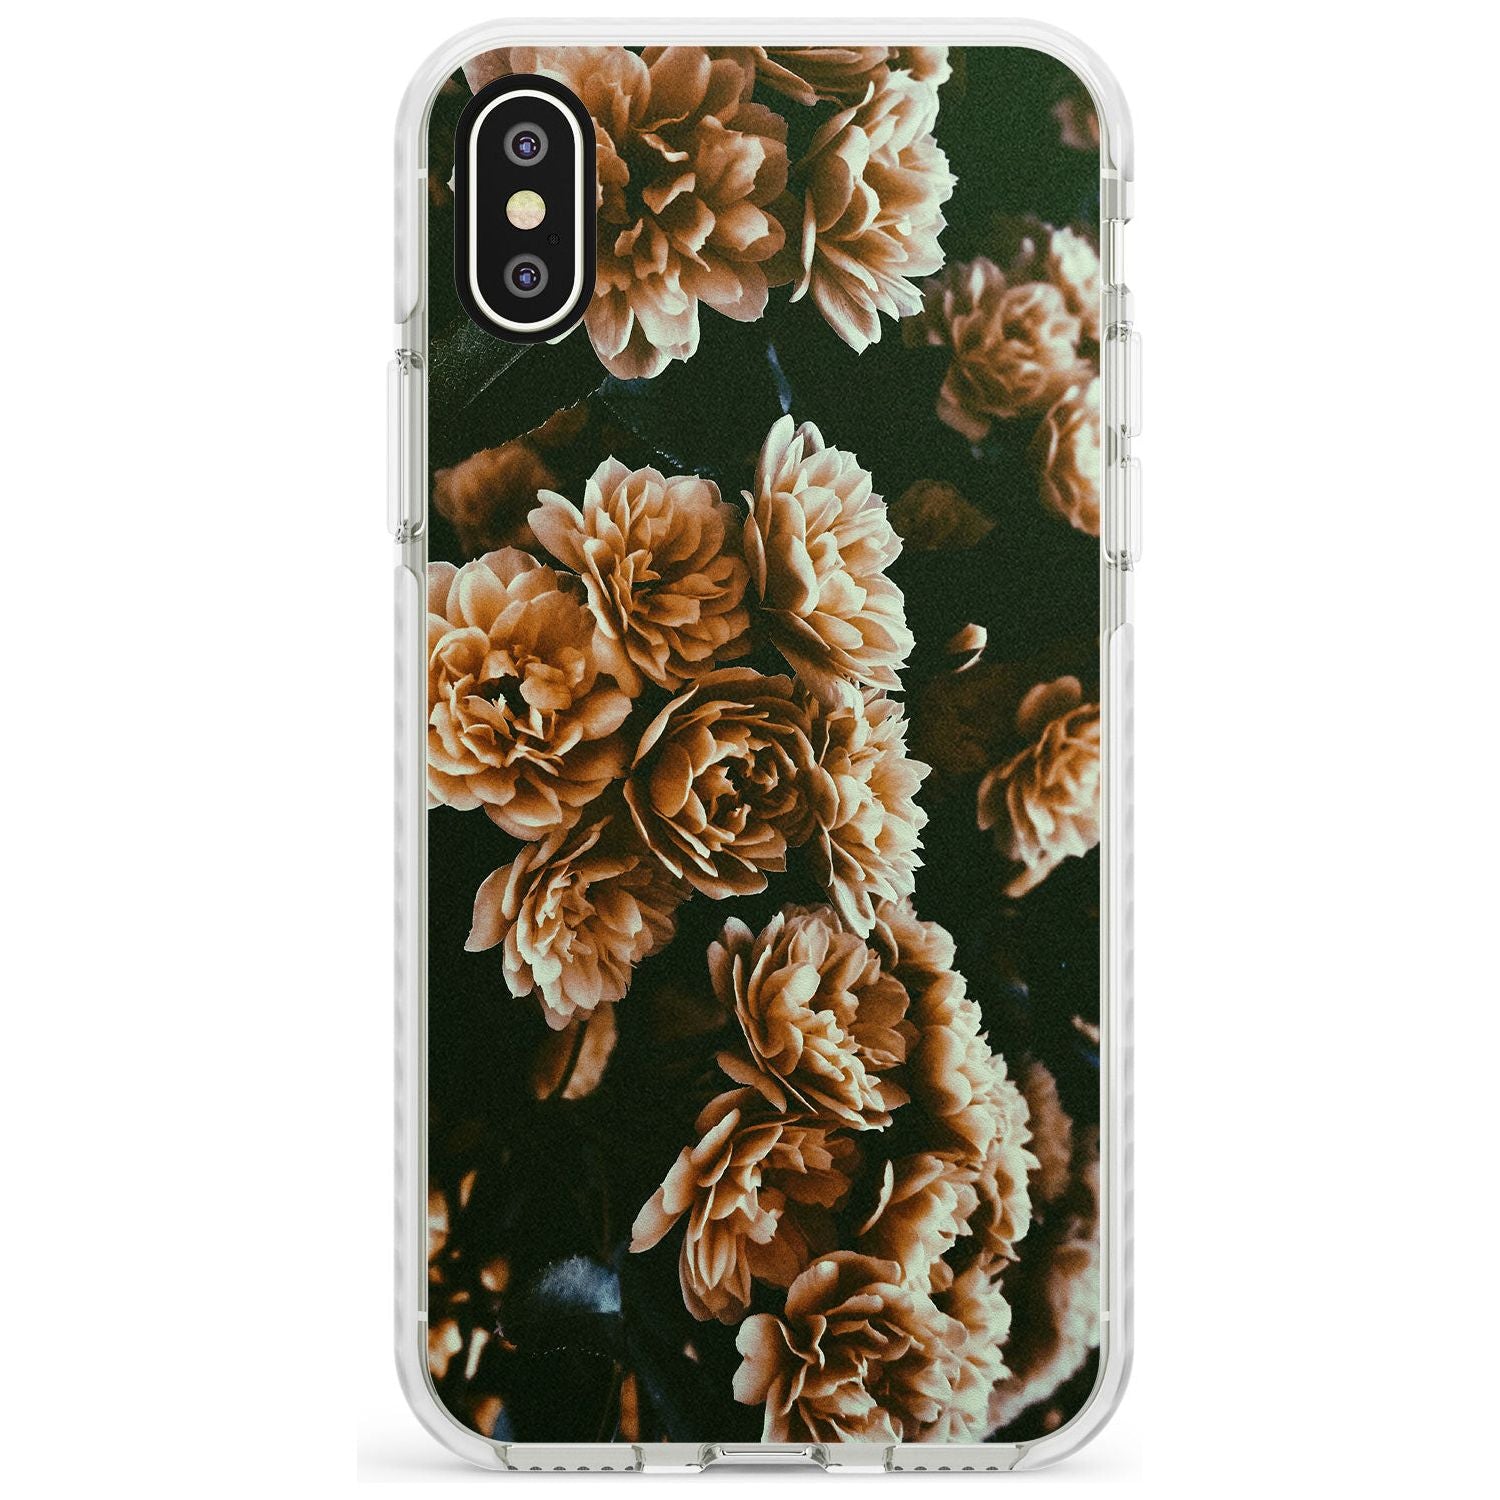 White Peonies - Real Floral Photographs Impact Phone Case for iPhone X XS Max XR